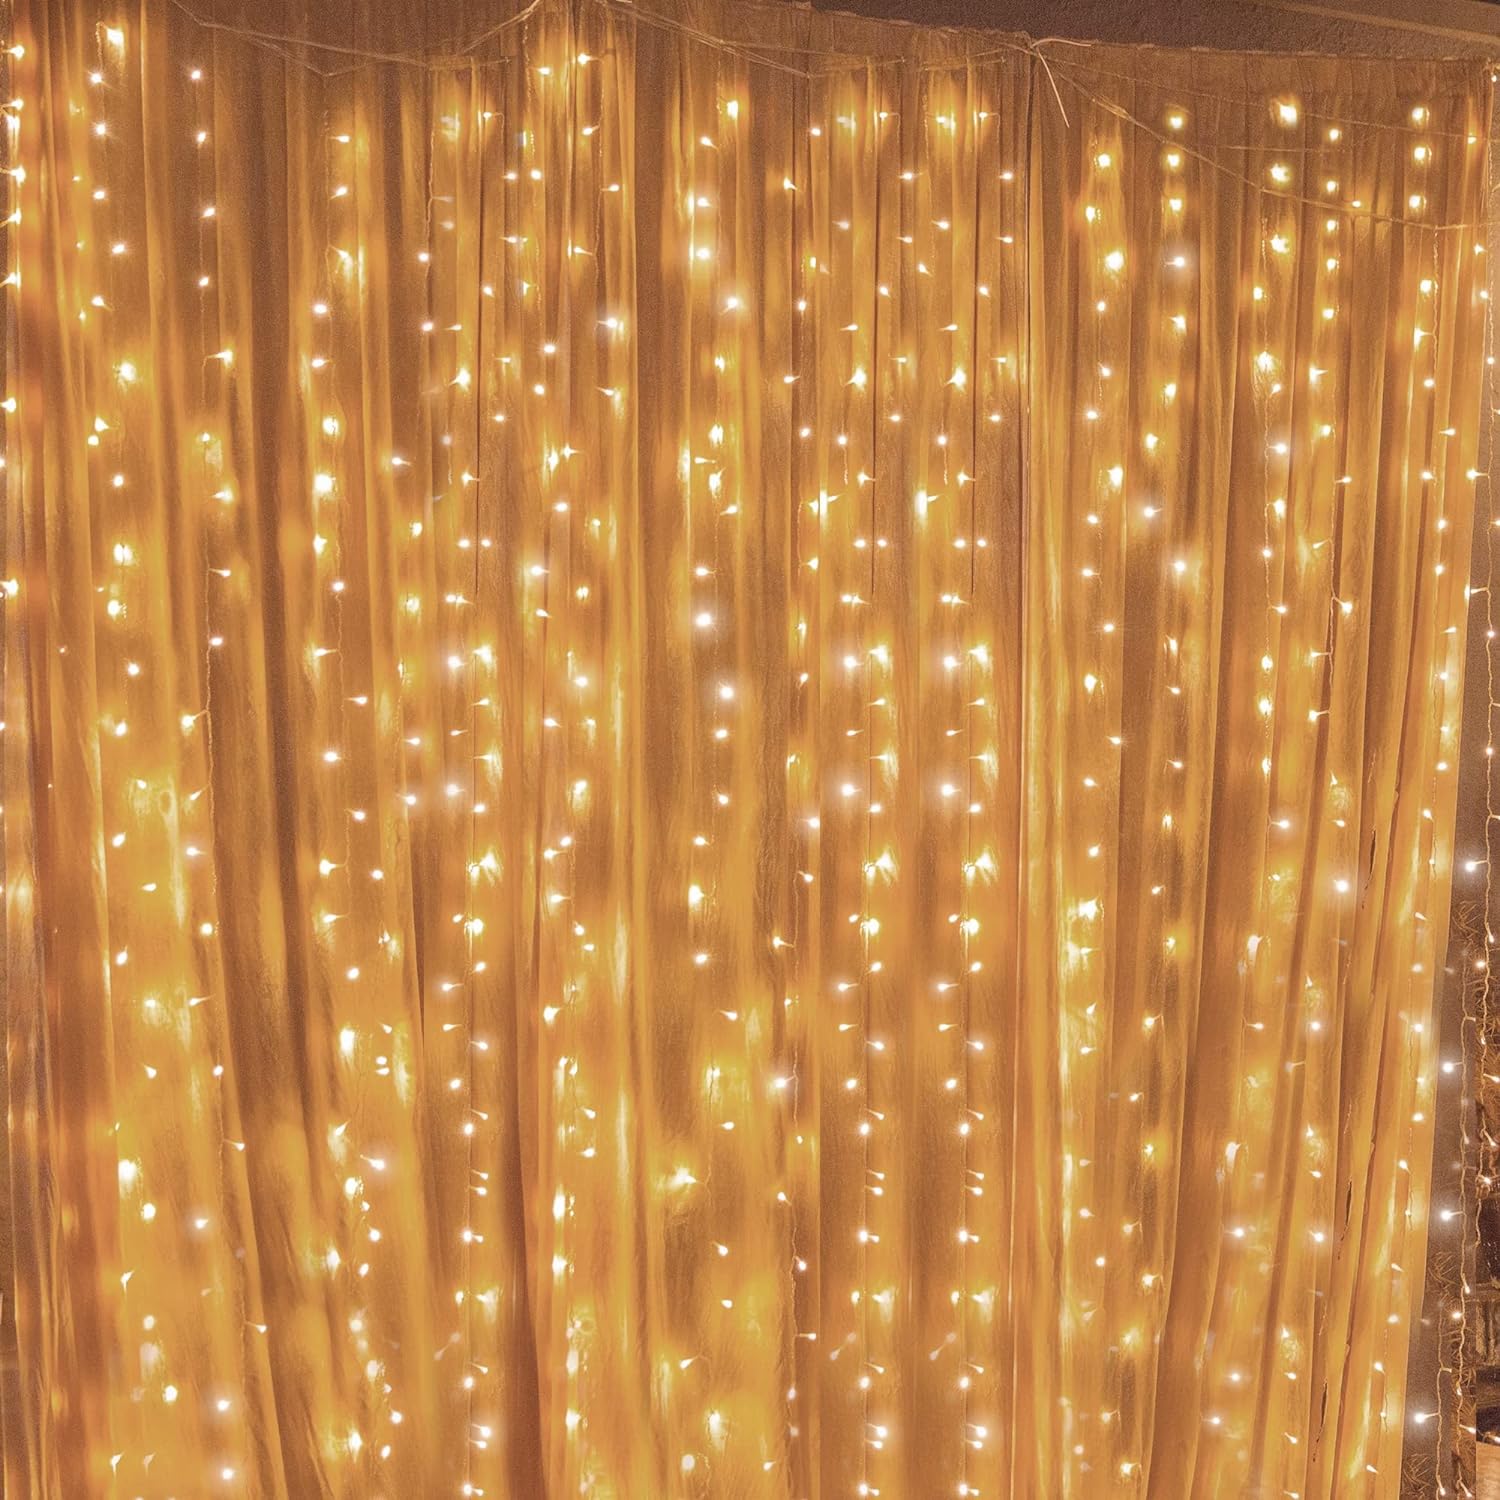 Twinkle Star 300 LED Window Fairy Curtain String Lights, 8 Modes Fairy Lights for Bedroom Wedding Party Home Garden Outdoor Indoor Wall Decorations, Warm White, 2 Pack